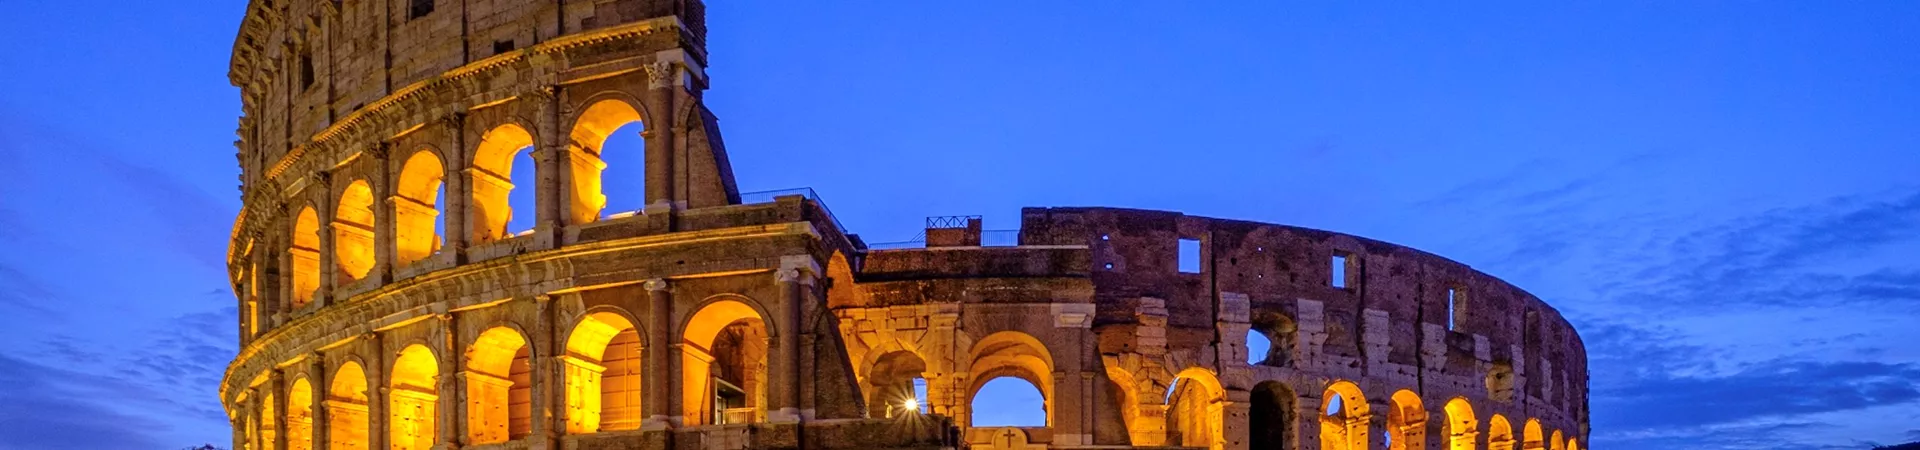 View of coliseum in Rome against blue sky at night